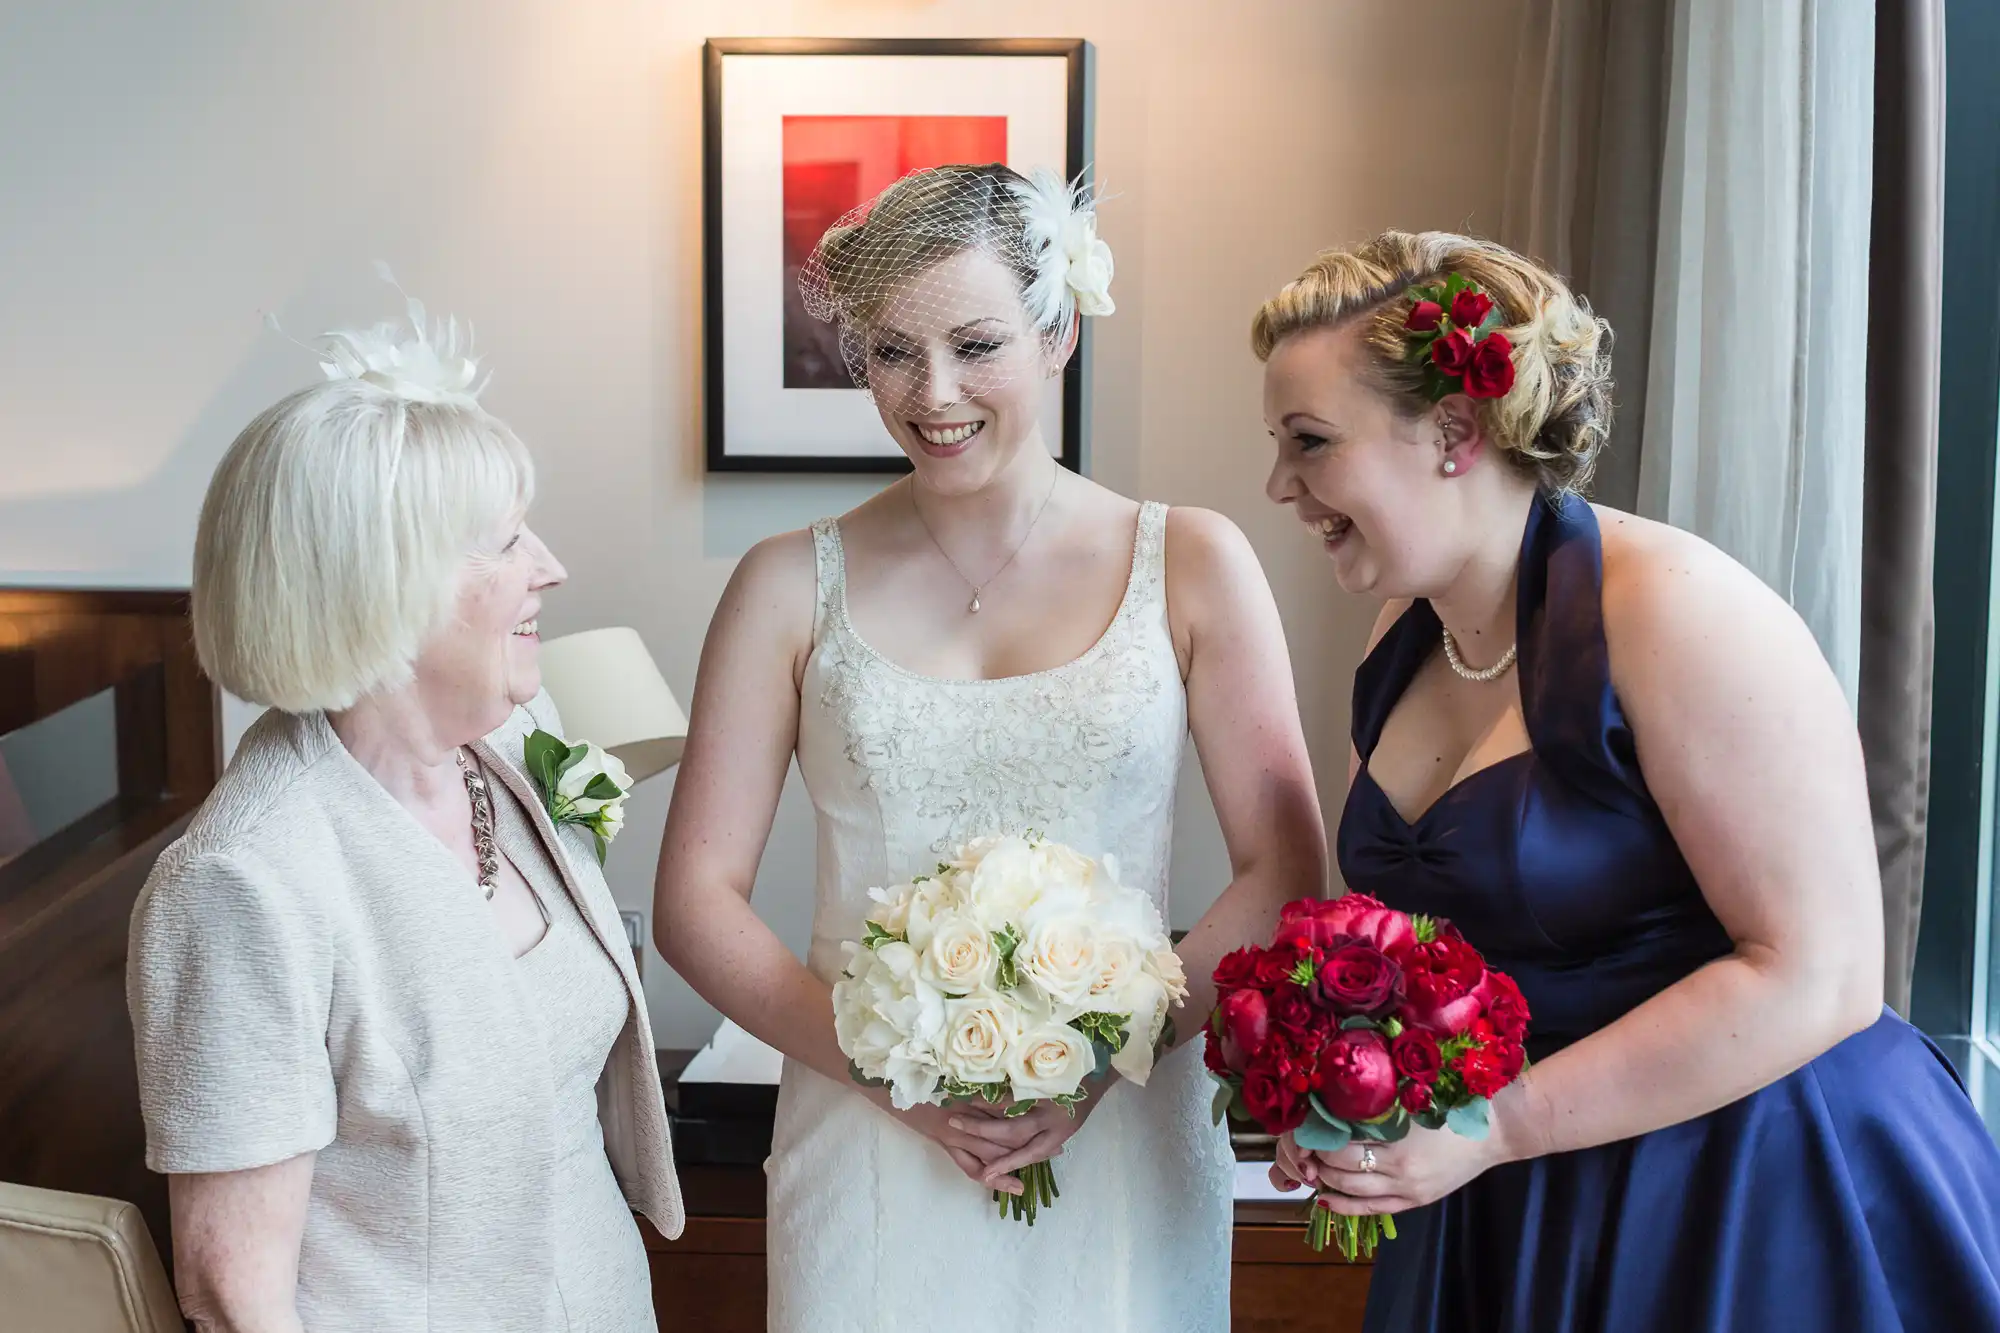 A bride holding a bouquet of white flowers smiles at her bridesmaid with red flowers in her hair, as an older woman in a white dress looks on indoors.